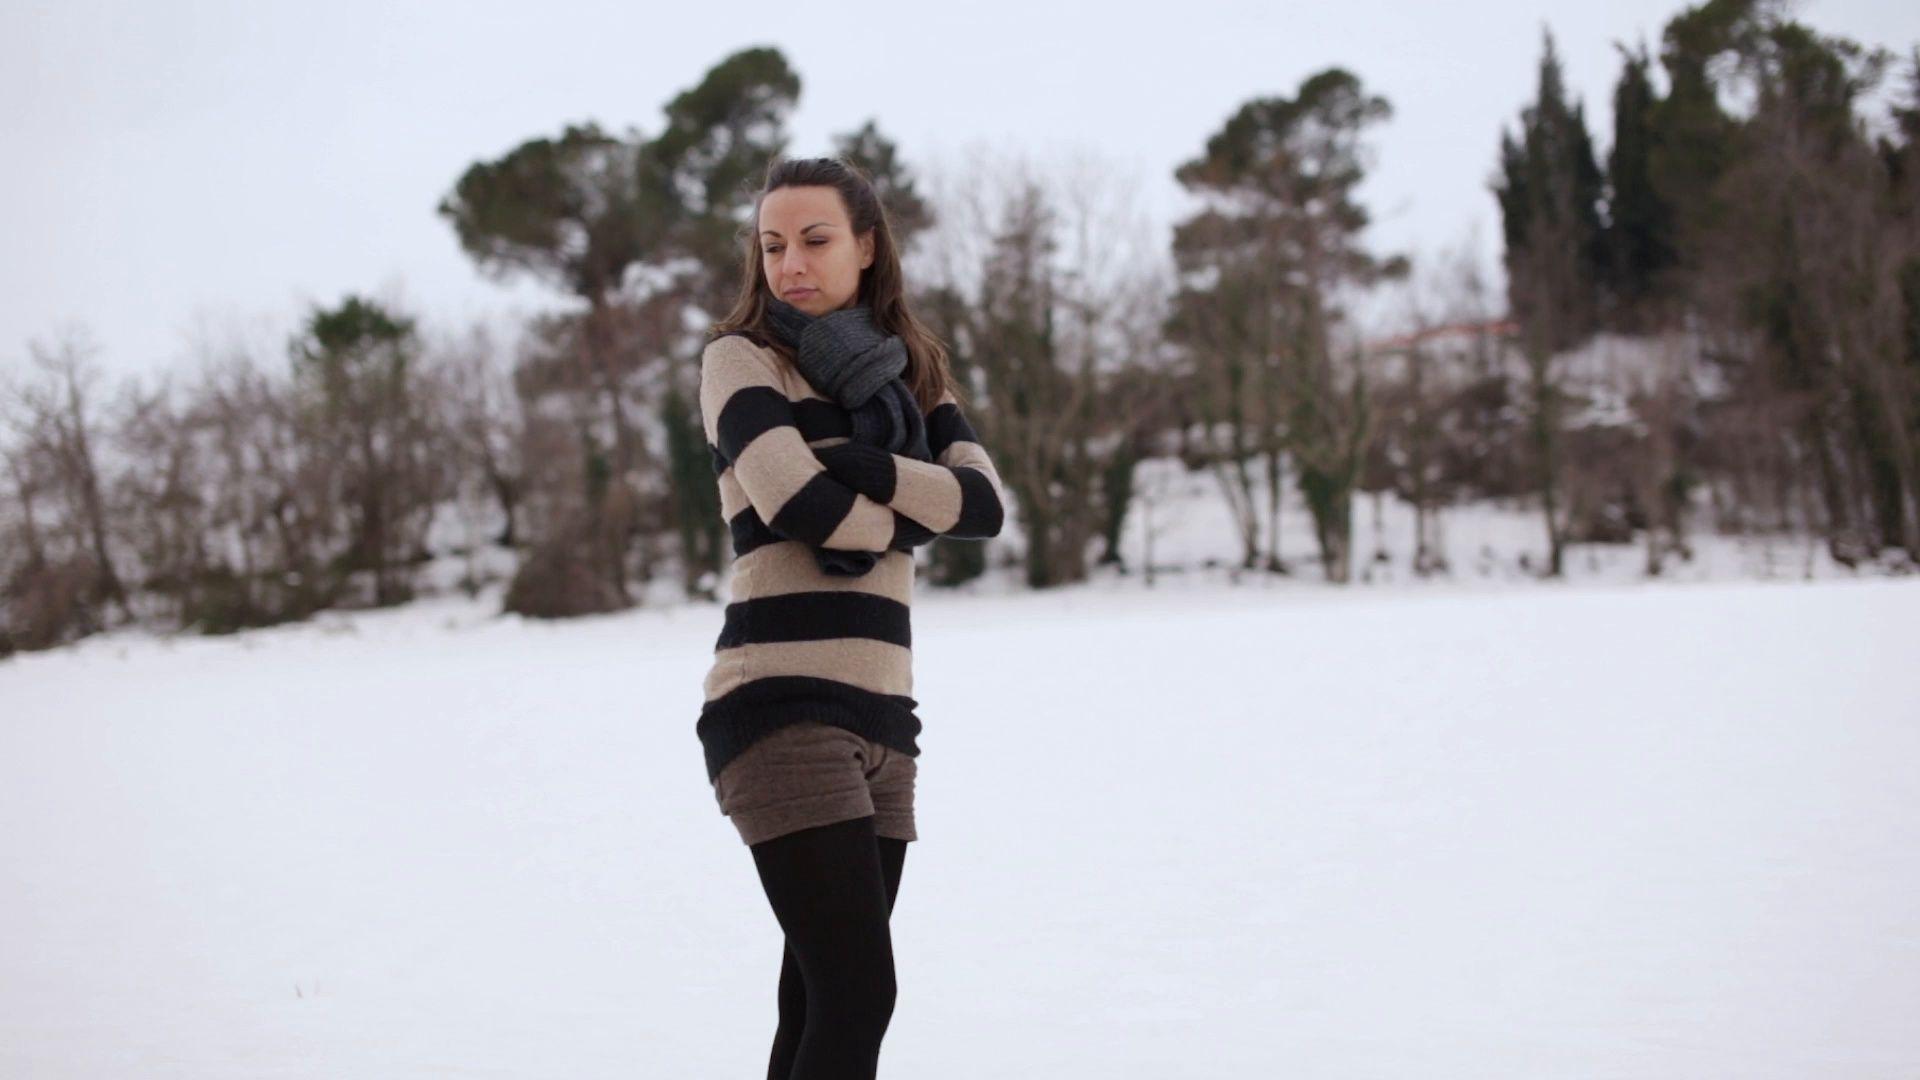 Young woman looking around in a snowy and cold environment